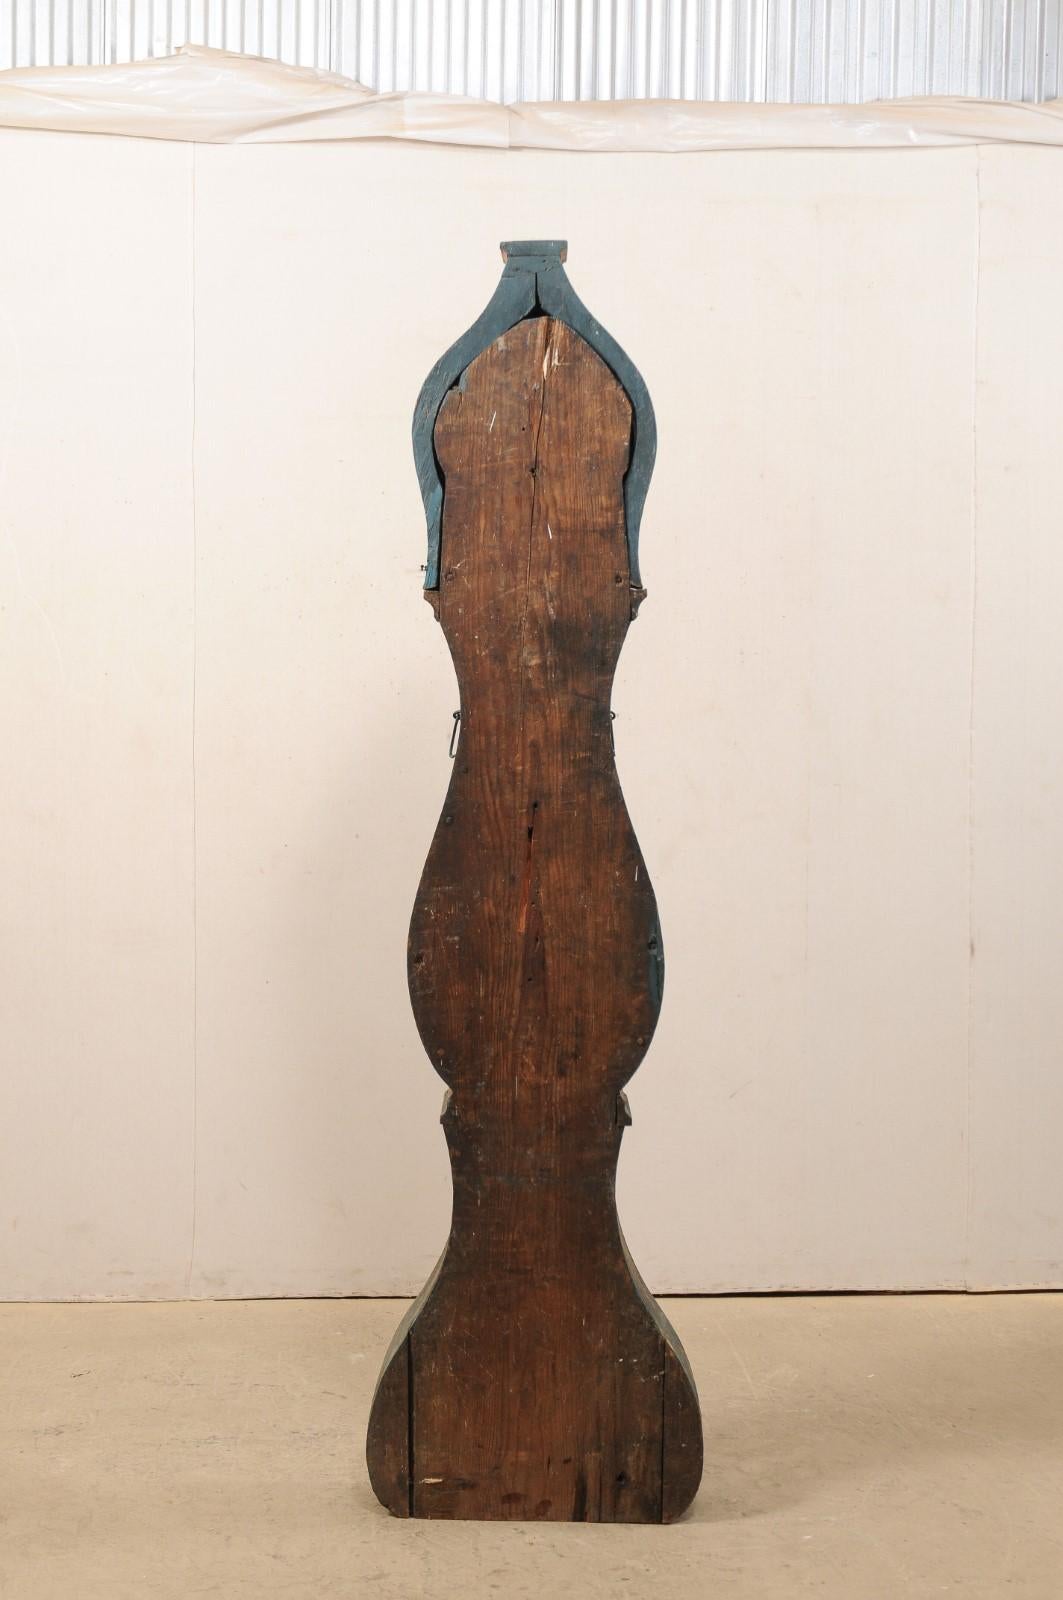 Early 19th Century Northern Swedish Grandfather Clock with Scraped Teal Finish For Sale 4